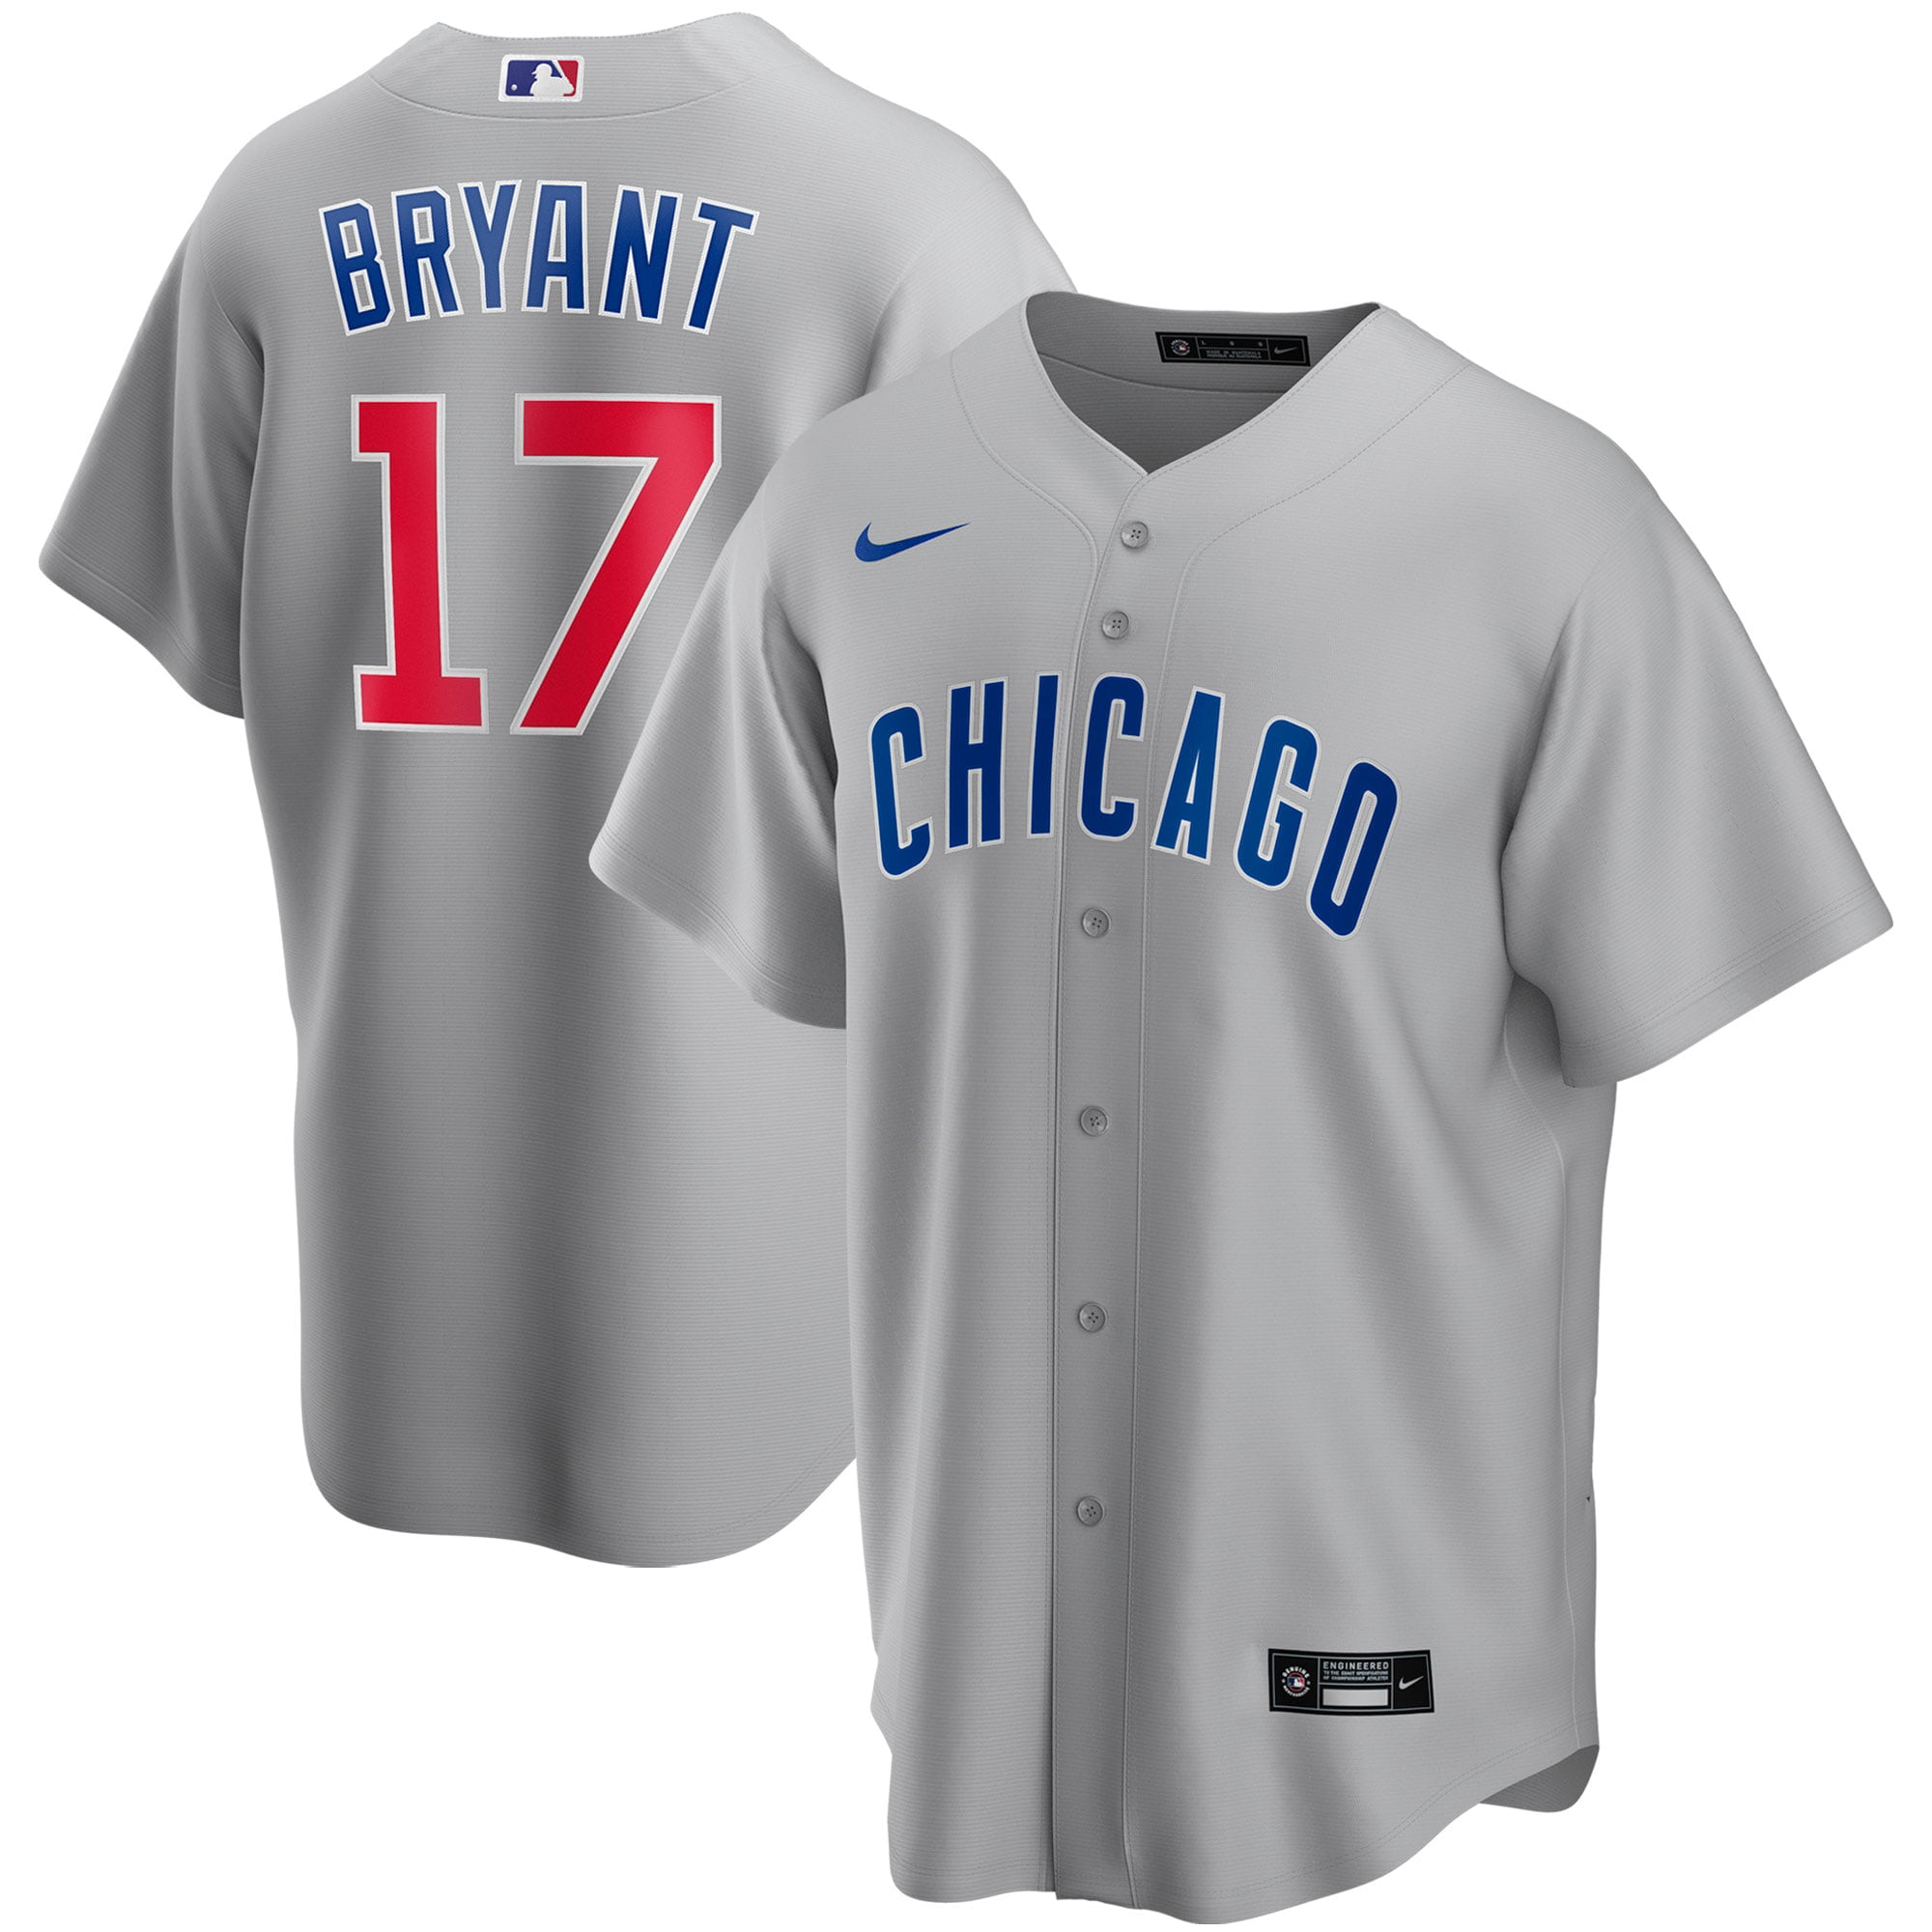 kris bryant jersey for kids